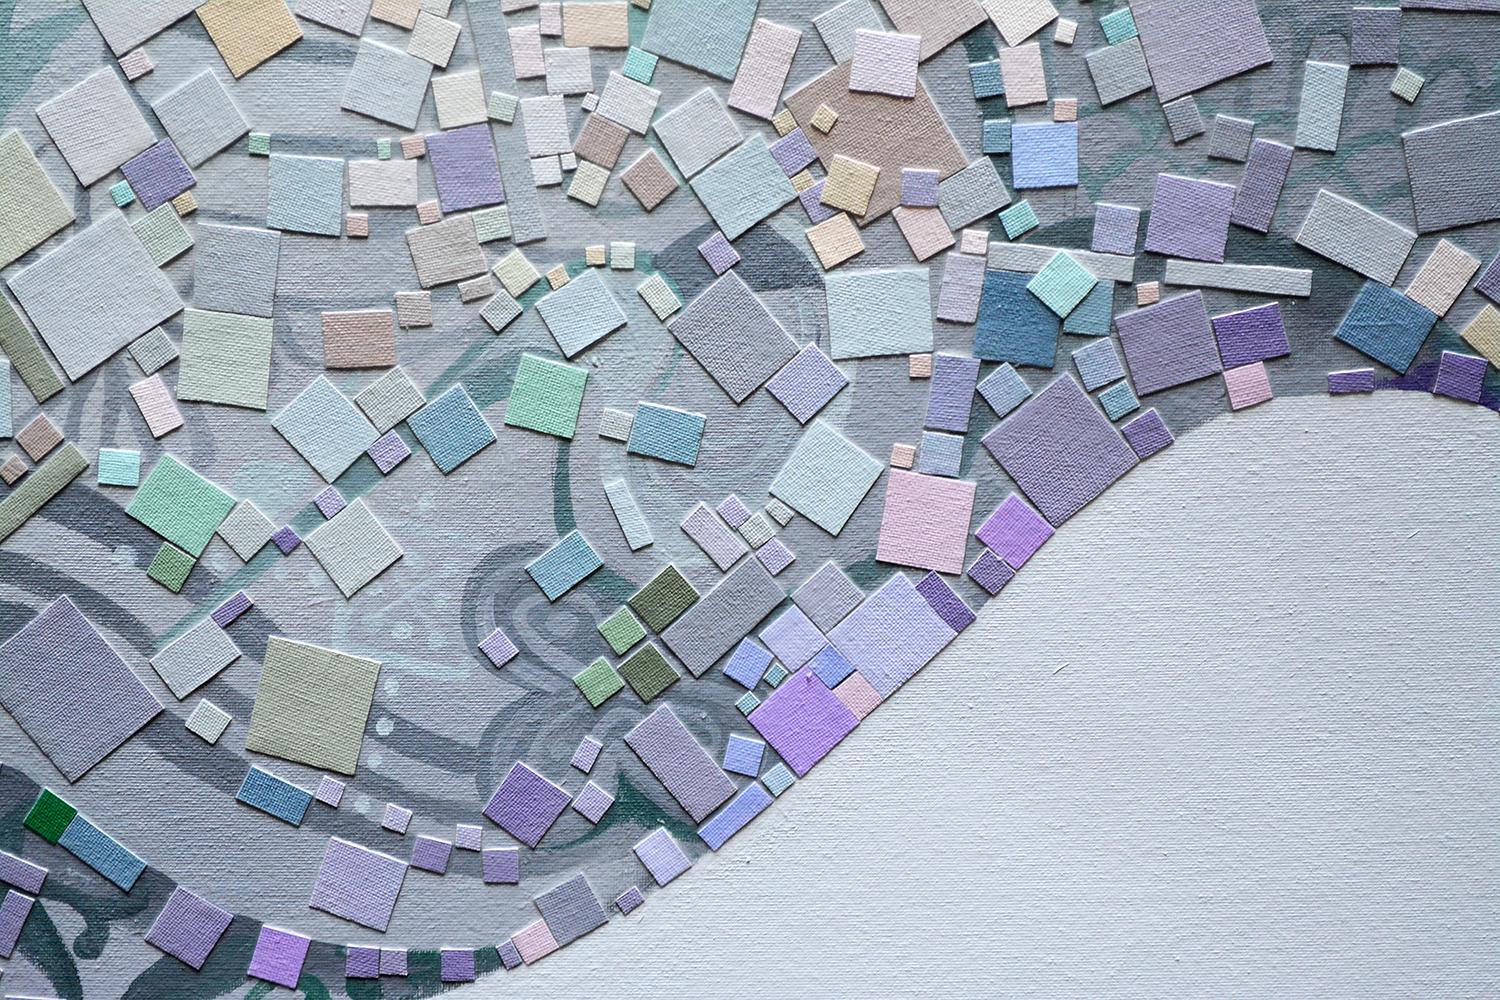 <p>Artist Comments<br /> I call this technique 'canvas mosaic' which I developed over the last nine years. The square shapes are cut and painted pieces of canvas fabric that I adhered to the stretched canvas. Initially inspired by digital pixels,